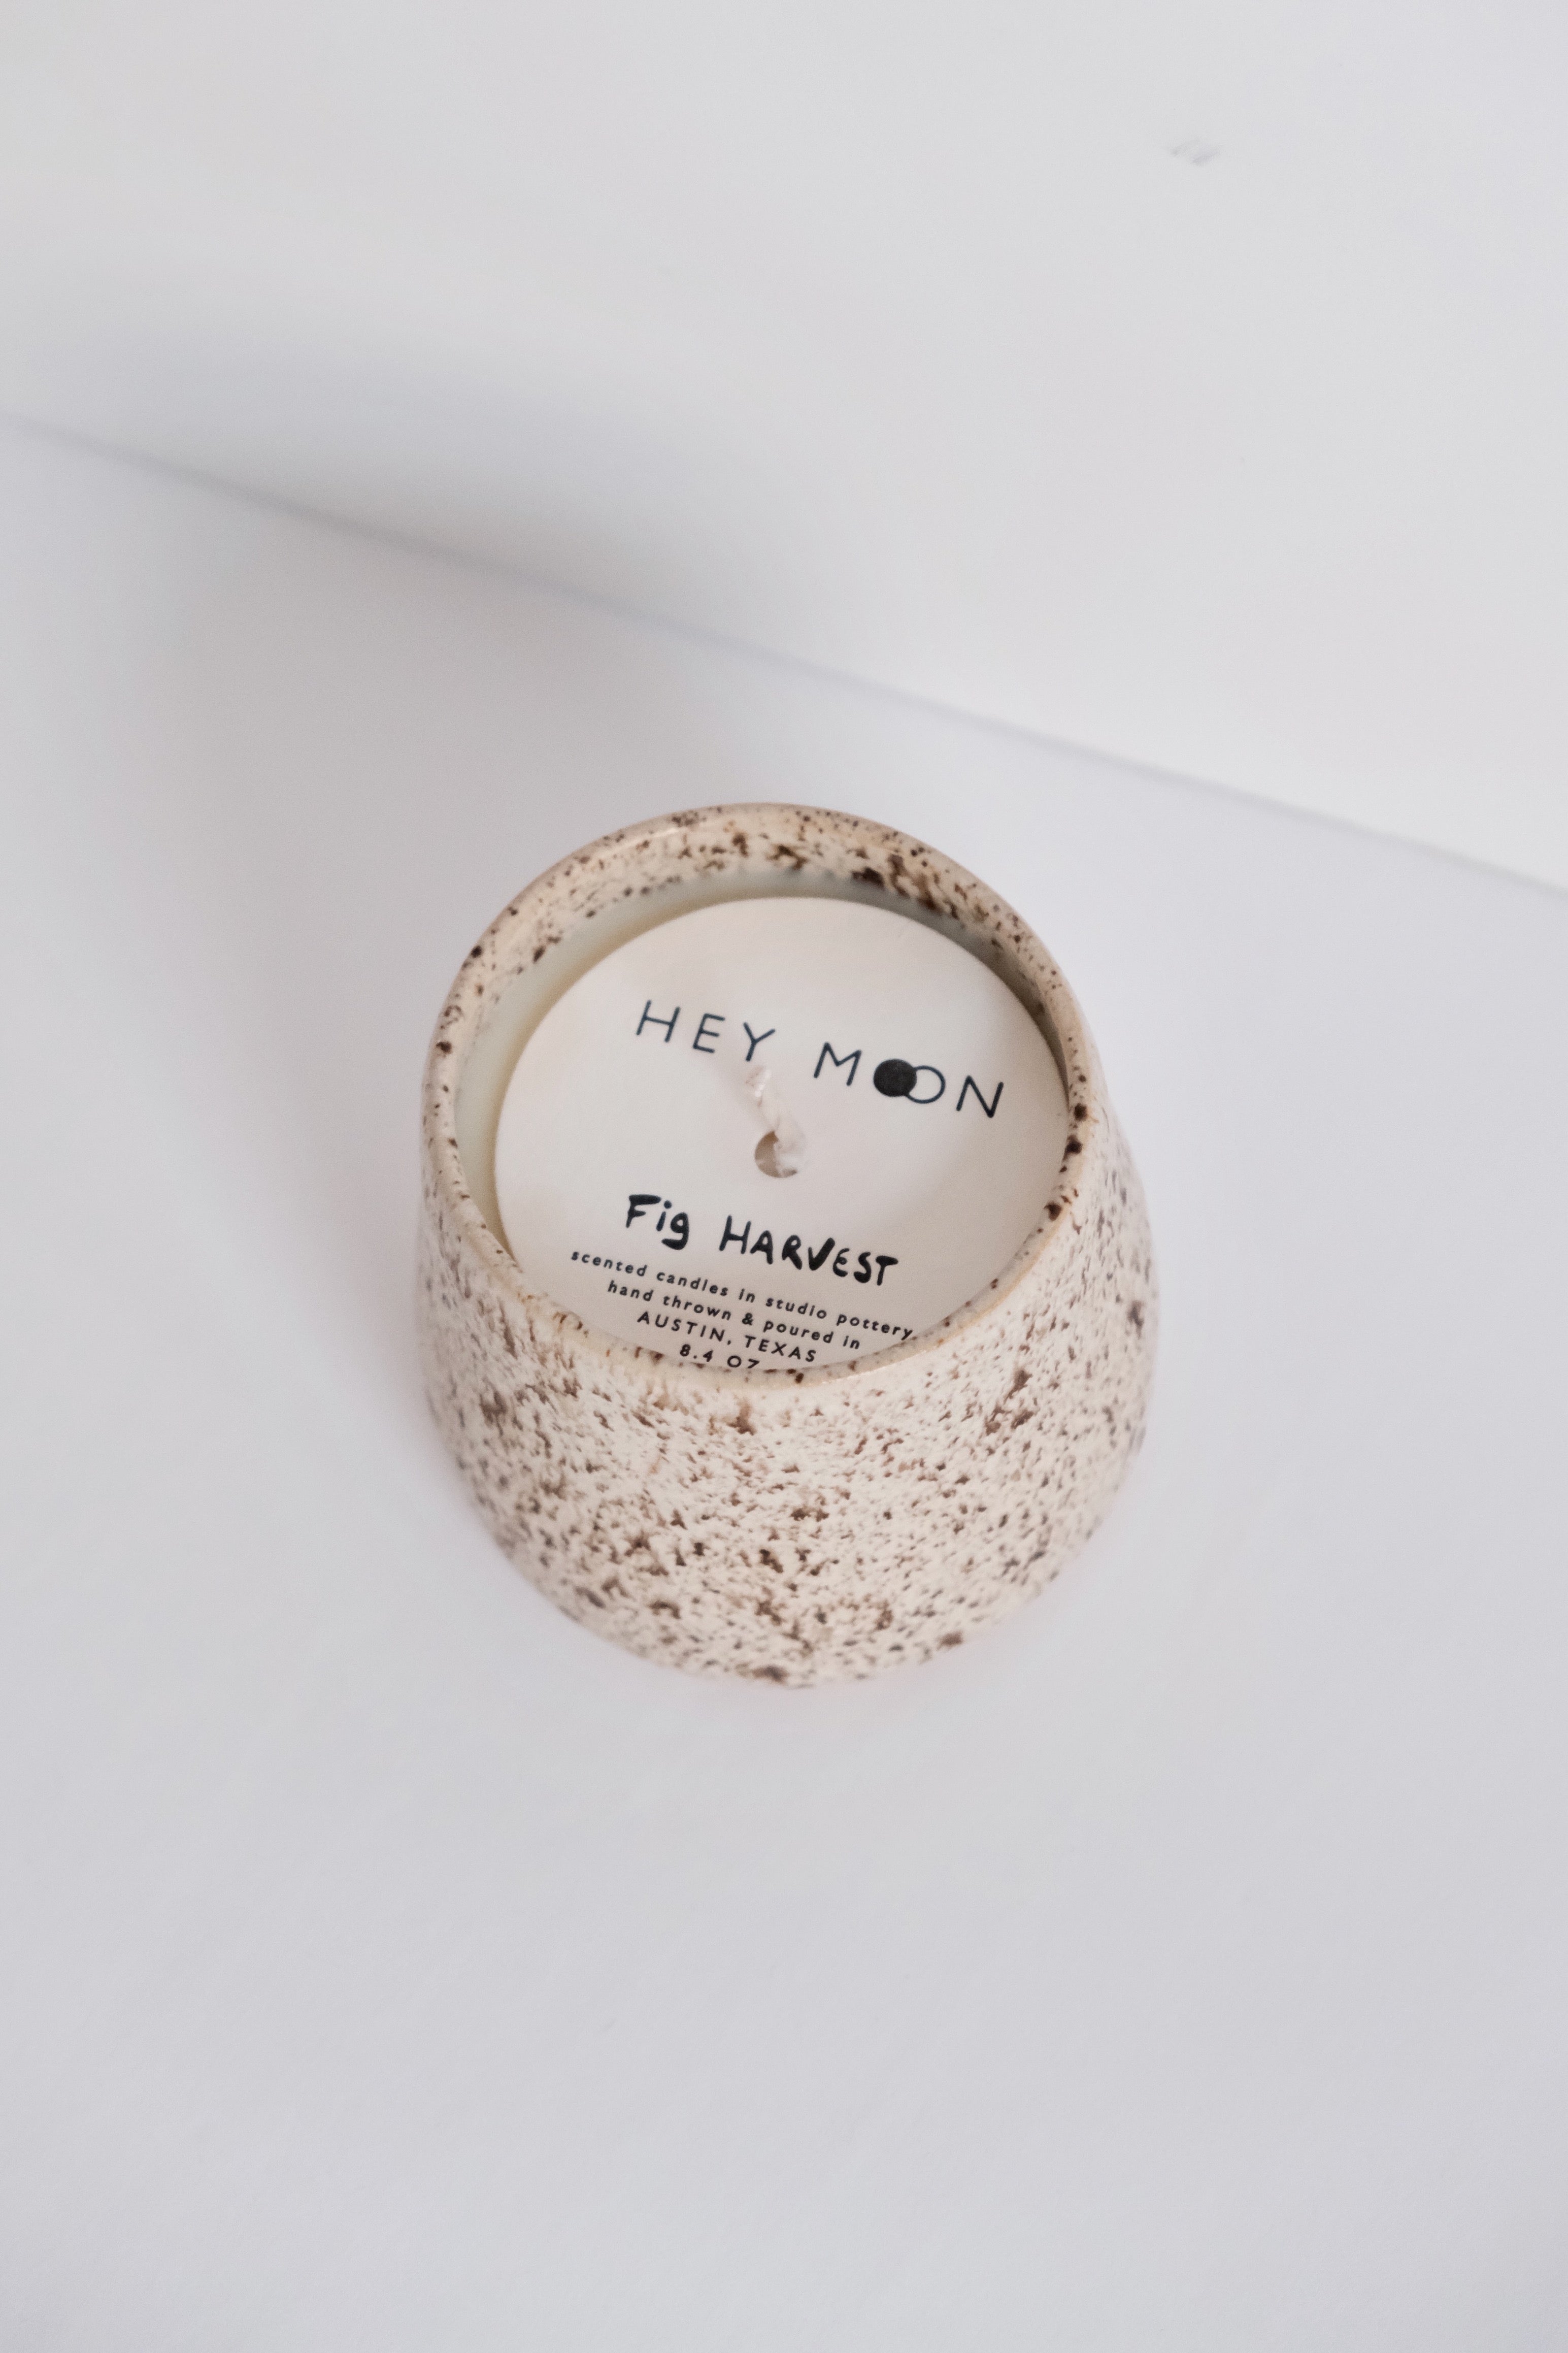 Hey Moon Fig Harvest Candle